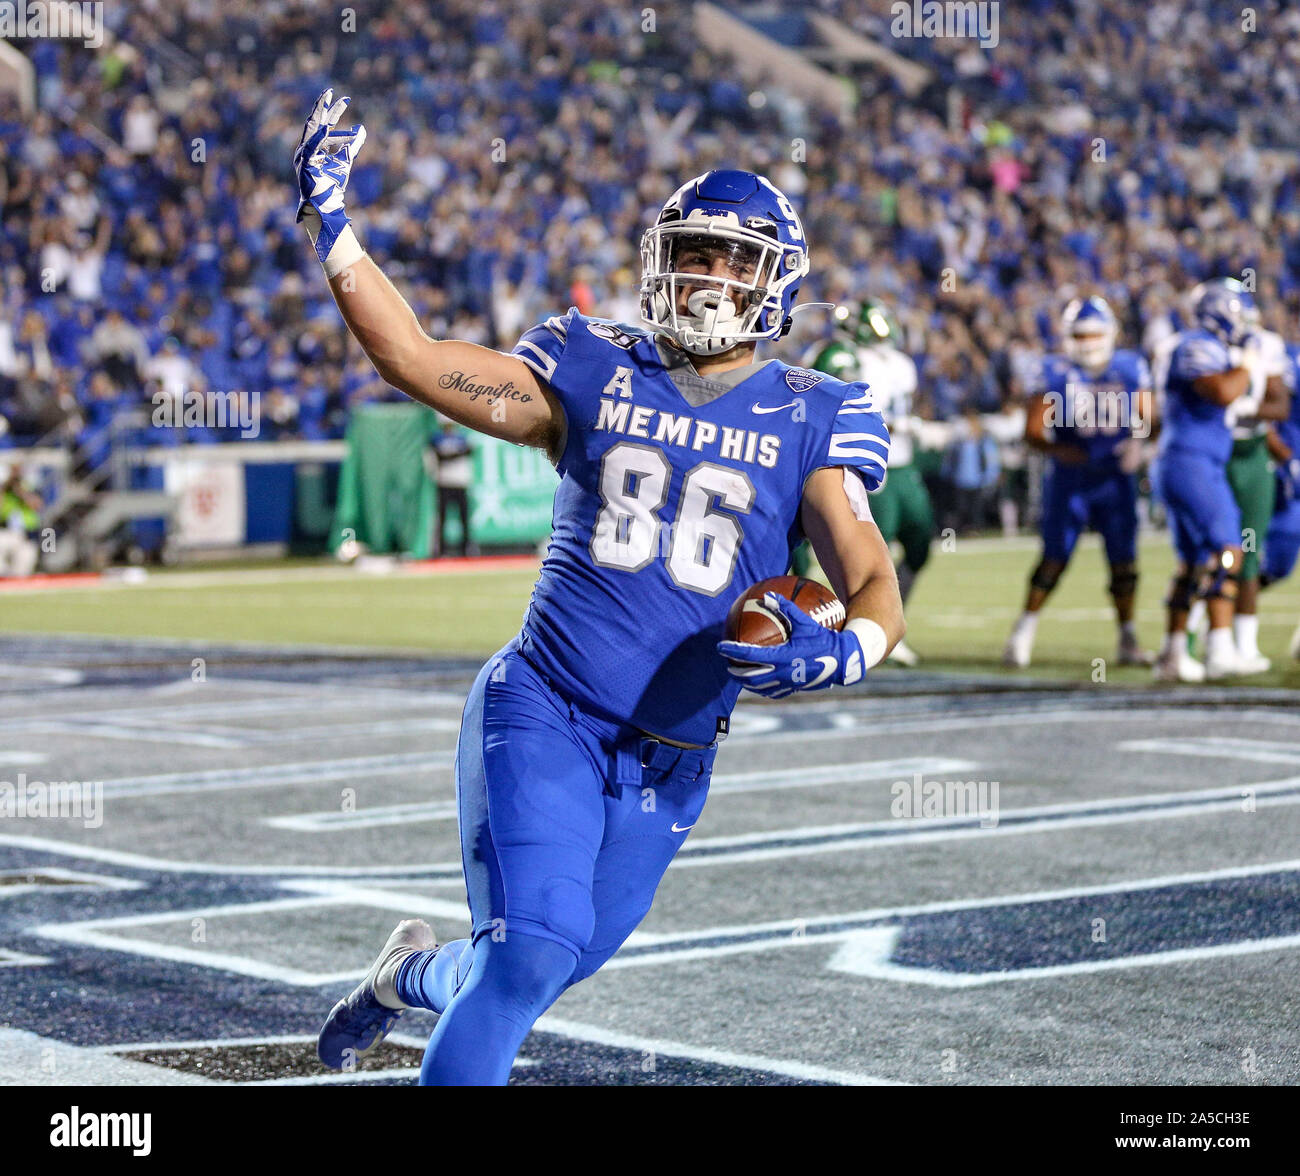 Memphis, TN, USA. 19th Oct, 2019. Memphis' Joey Magnifico #86 celebrates after rushing for a touchdown during the NCAA football game between the Memphis Tigers and the Tulane Green Wave at Liberty Bowl Stadium in Memphis, TN. Kyle Okita/CSM/Alamy Live News Stock Photo